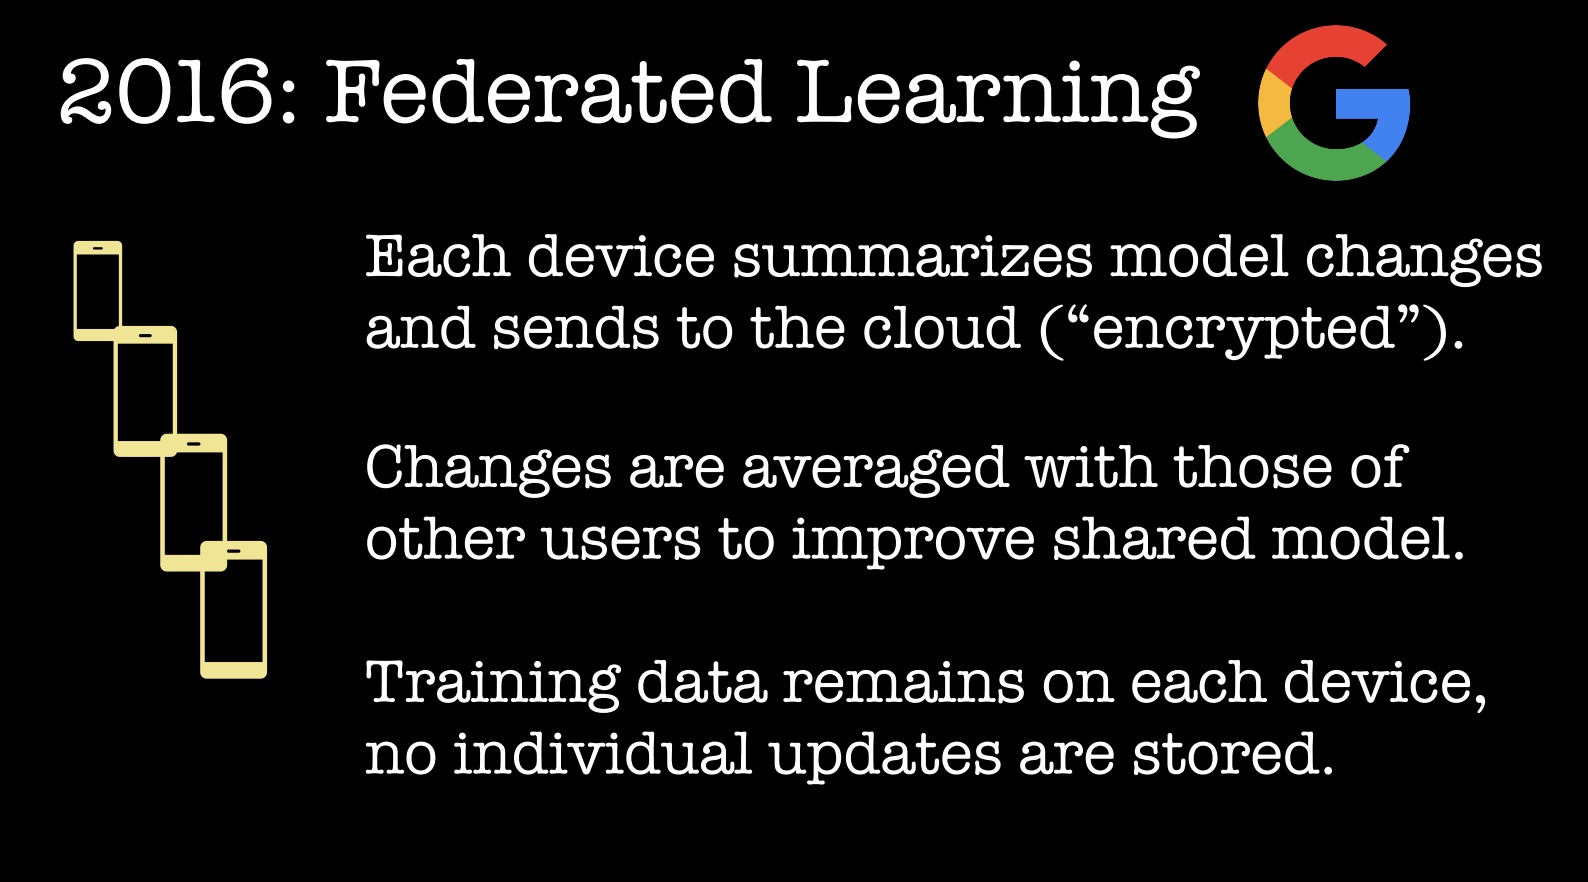 2016 Federated Learning